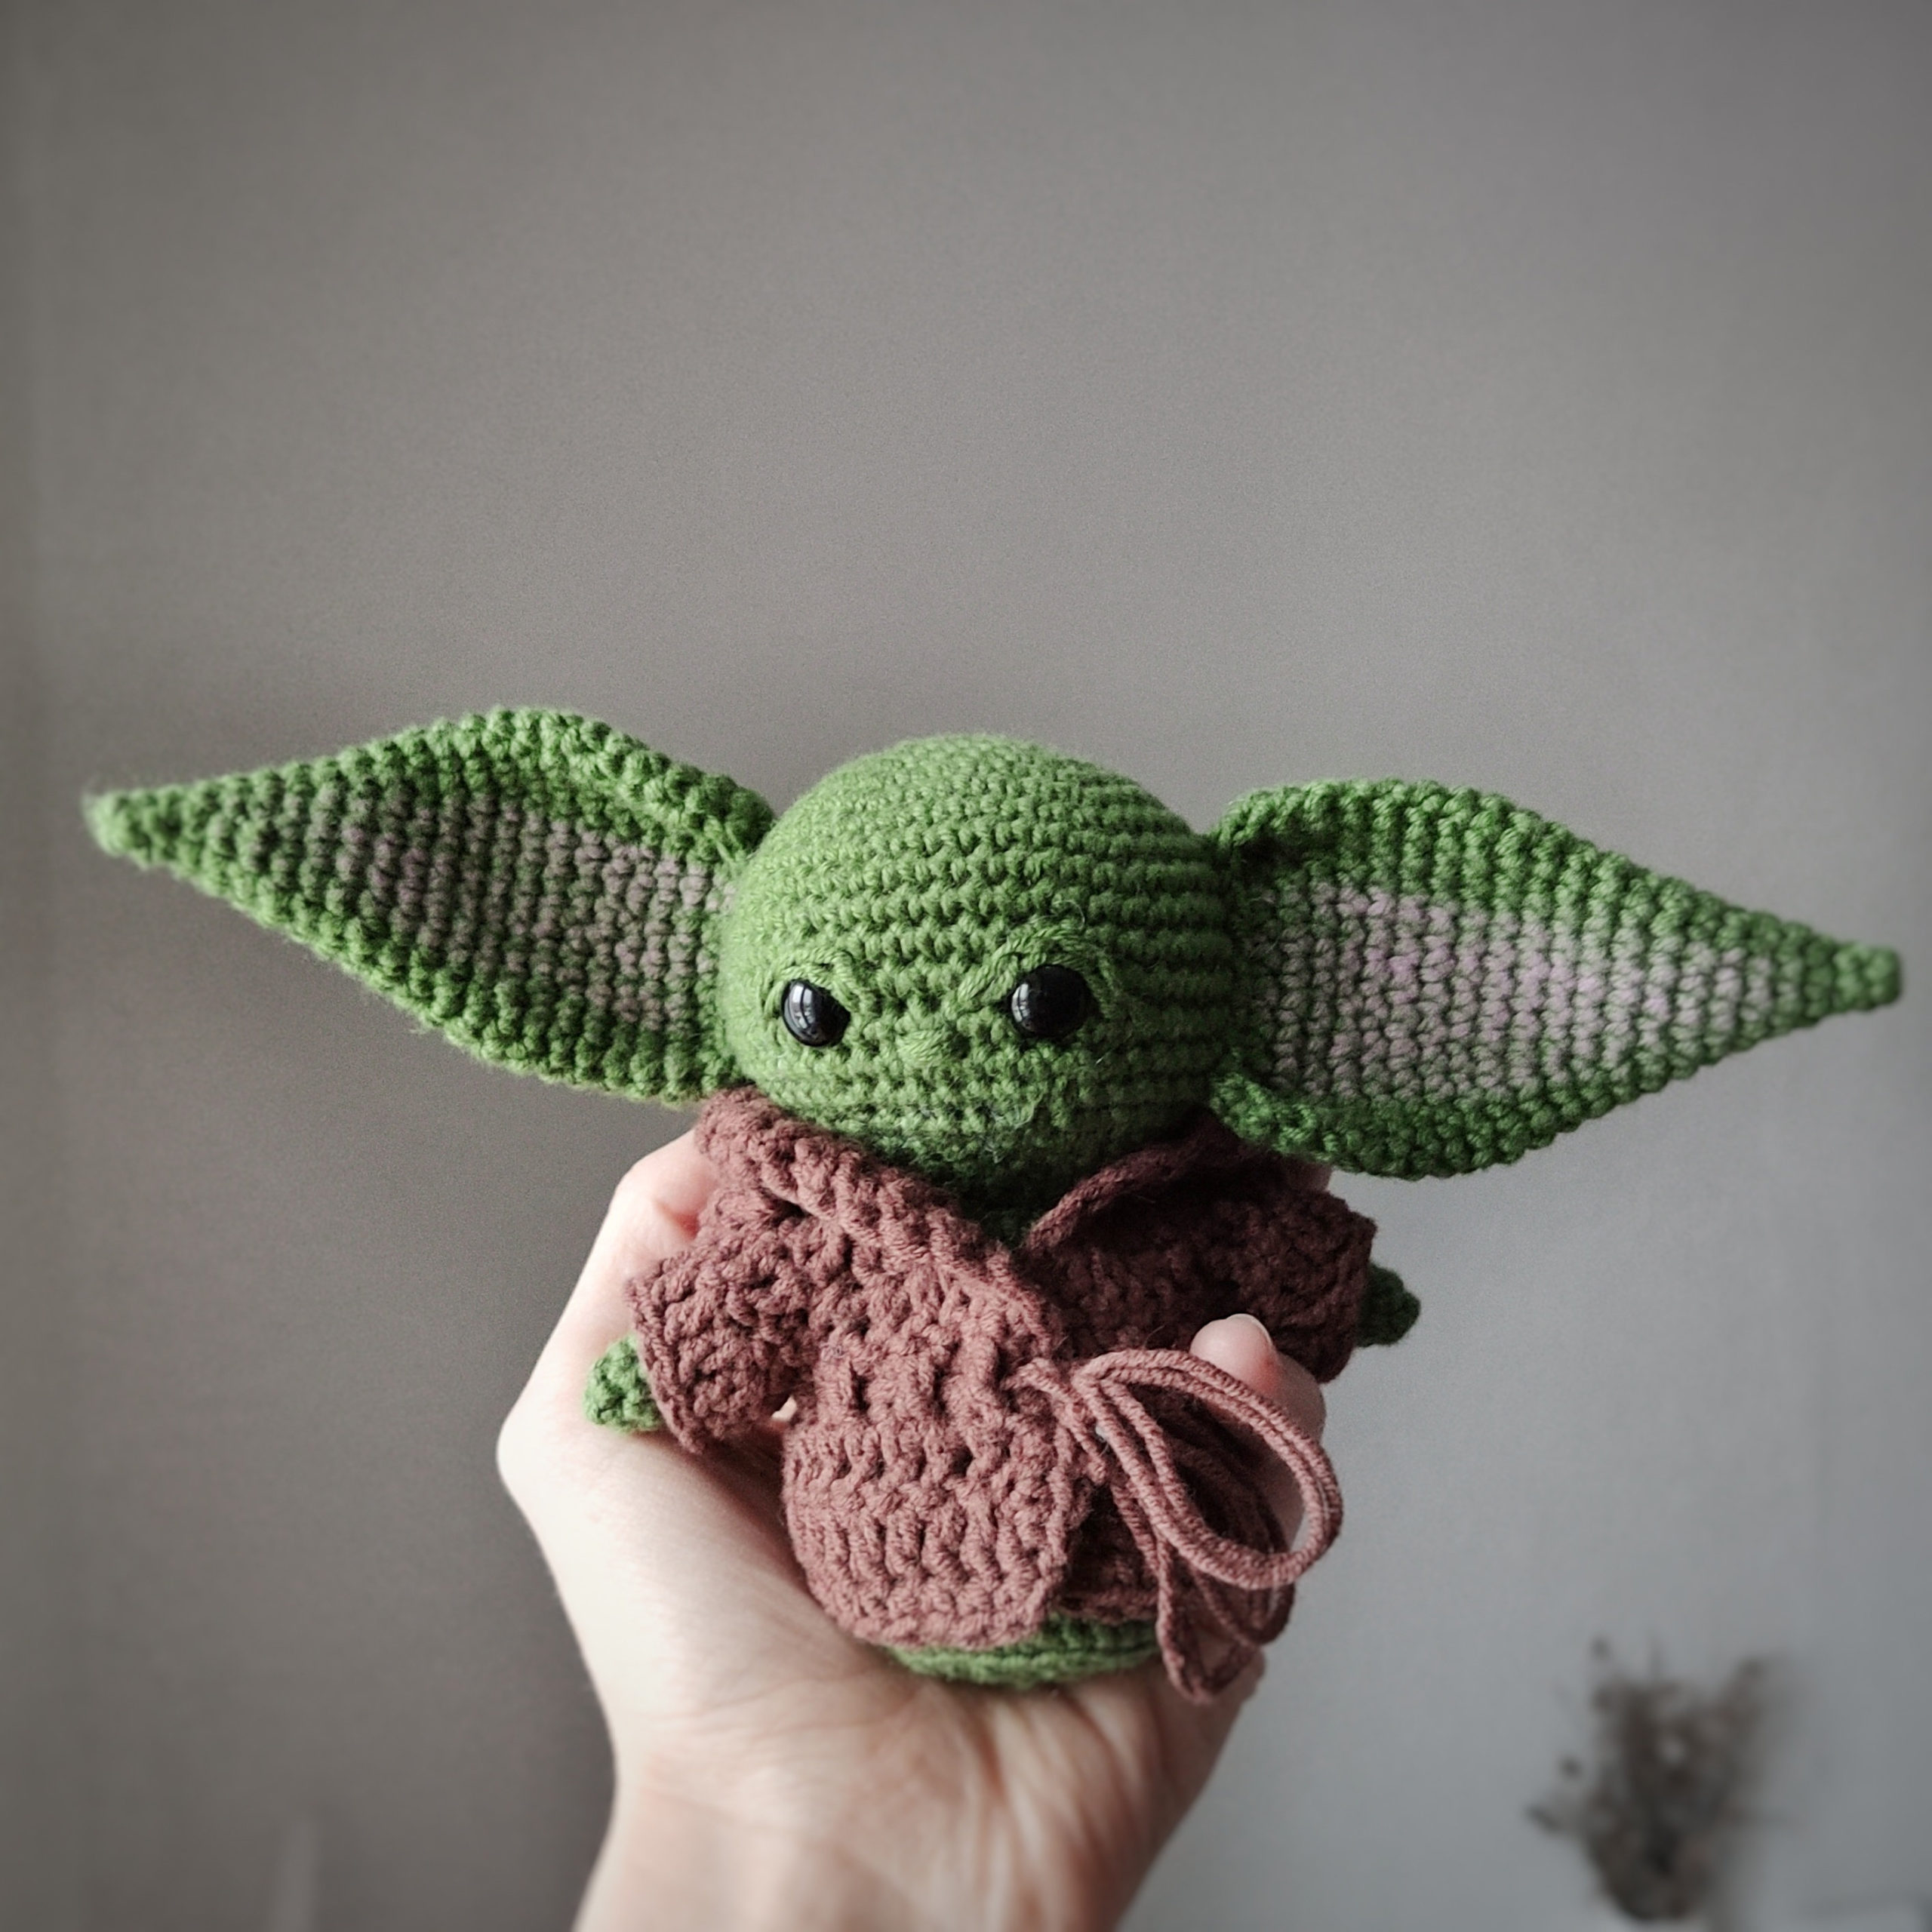 The Best Baby Yoda Patterns For Makers Who Crochet! Dolls, Booties